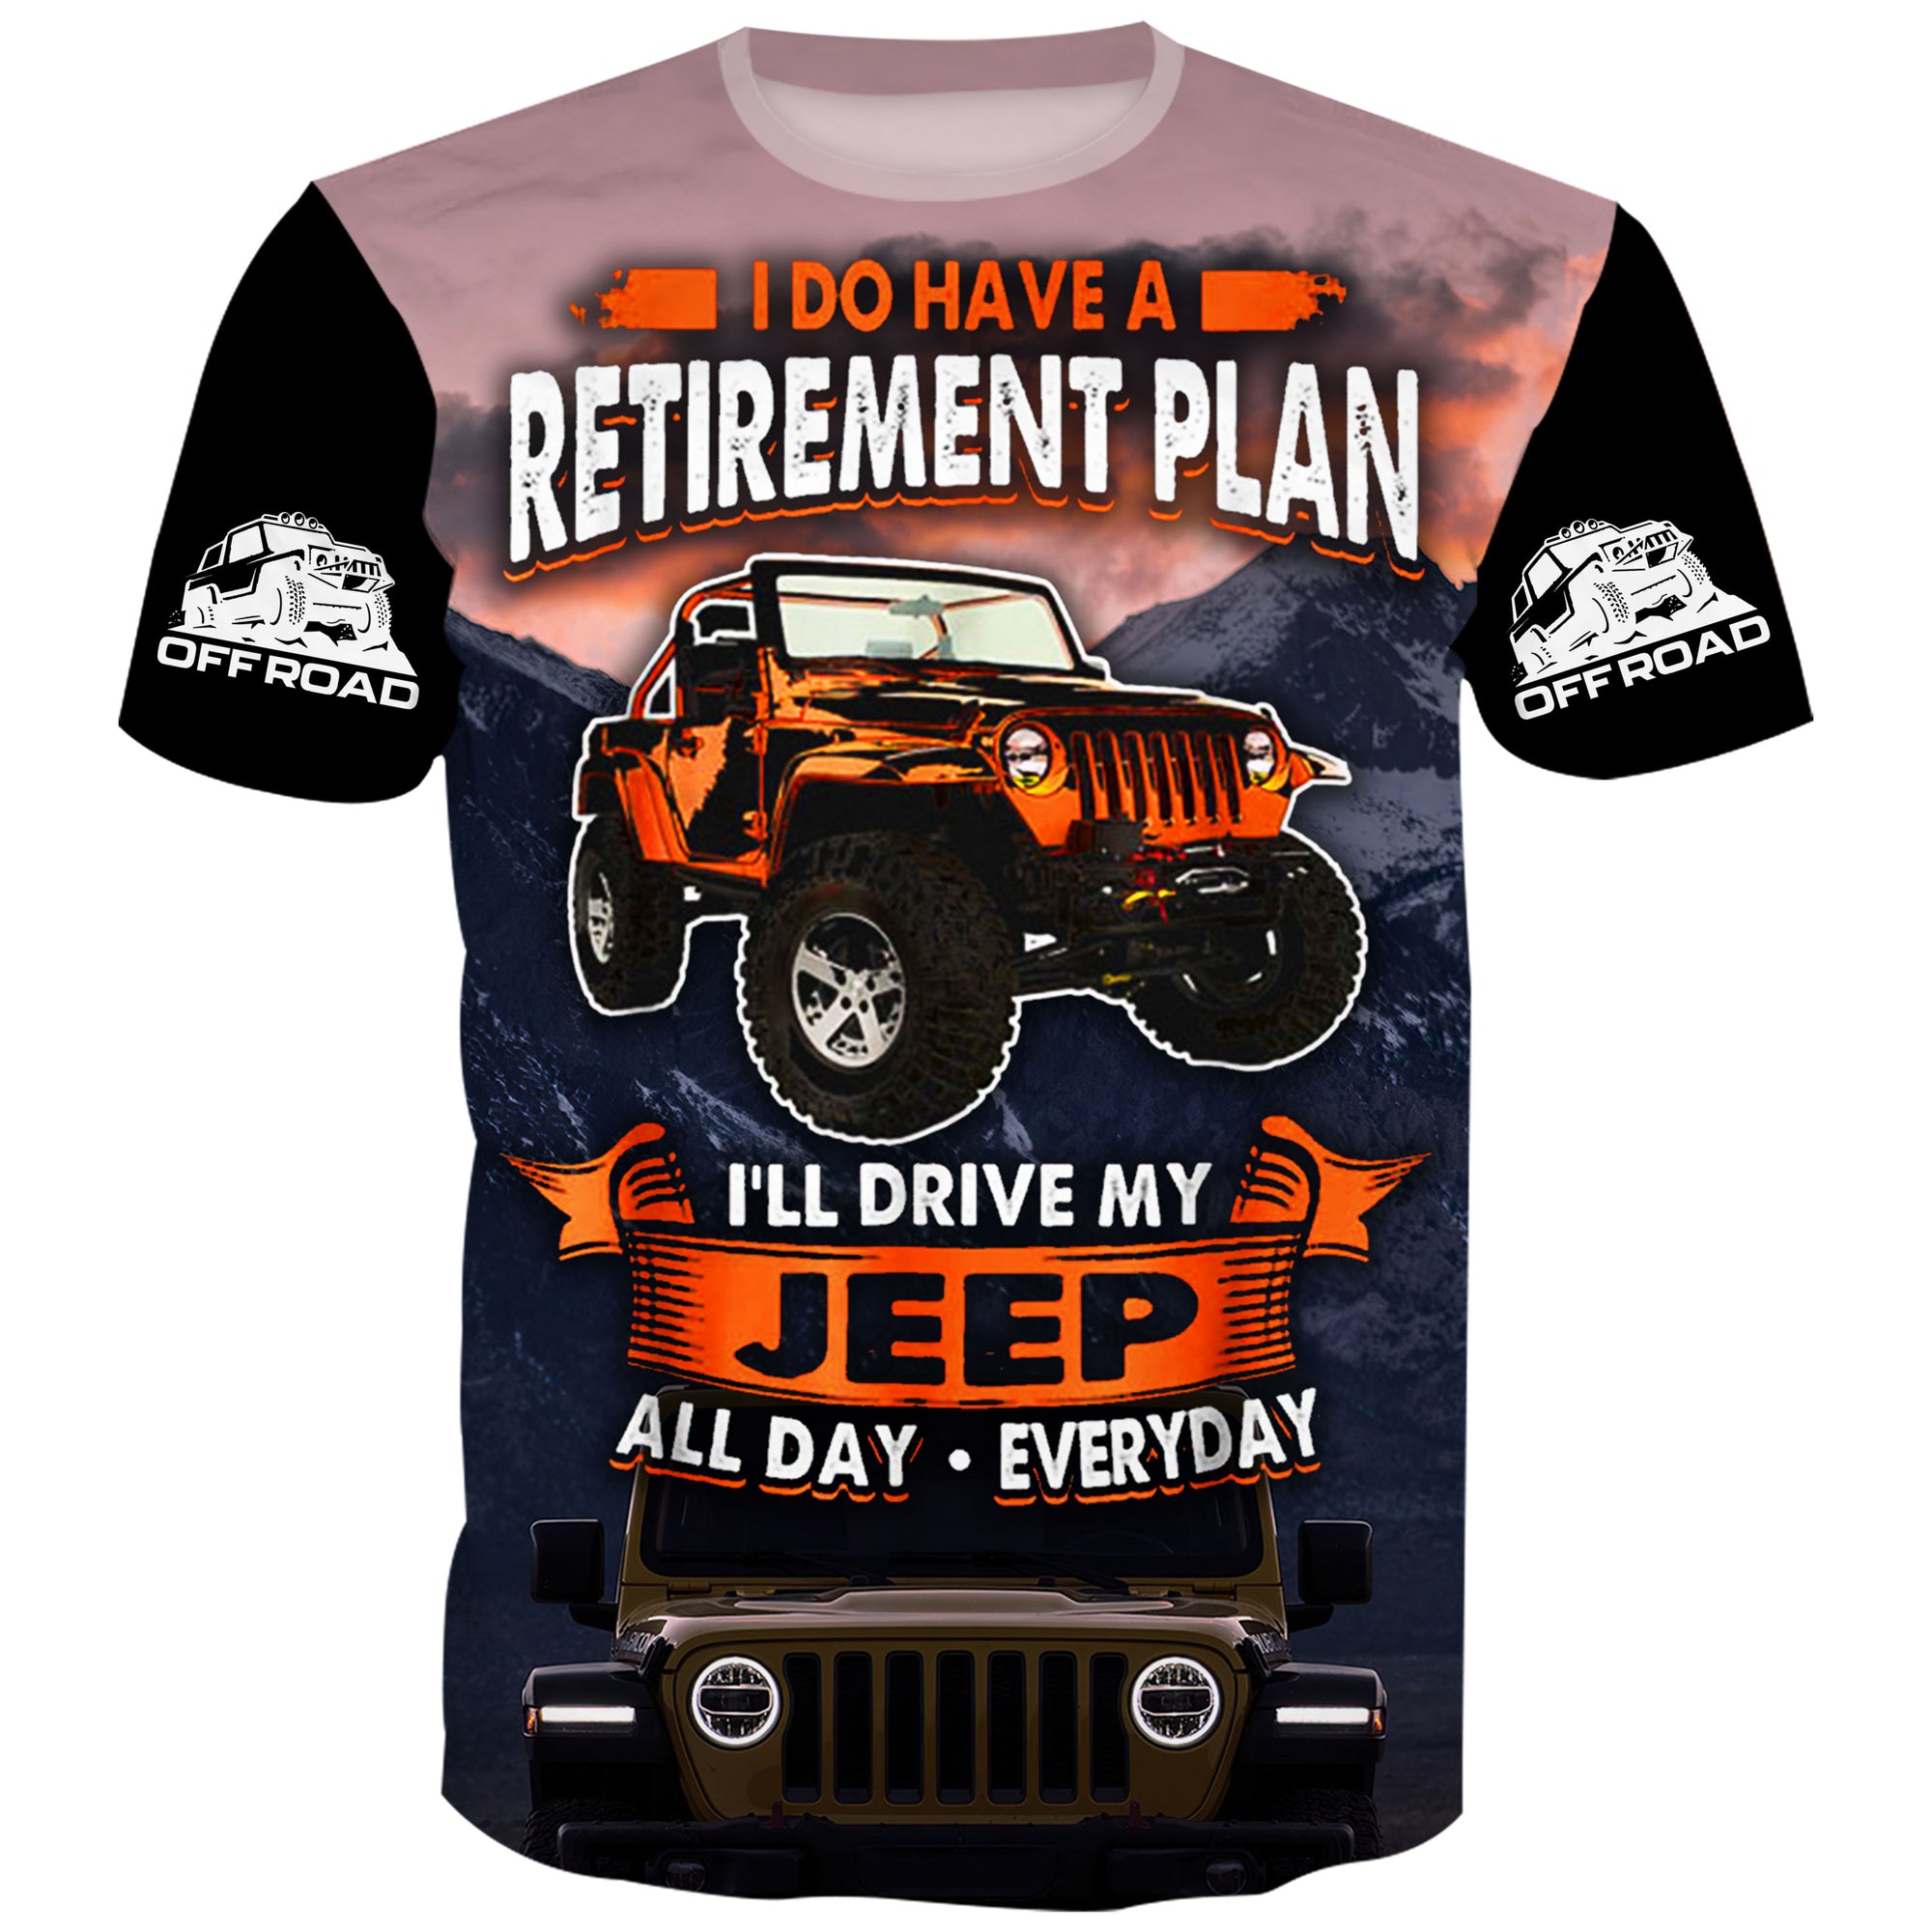 A colorful t-shirt with white text and a jeep picture that says “I do have a retirement plan. I’ll drive my jeep all day everyday”